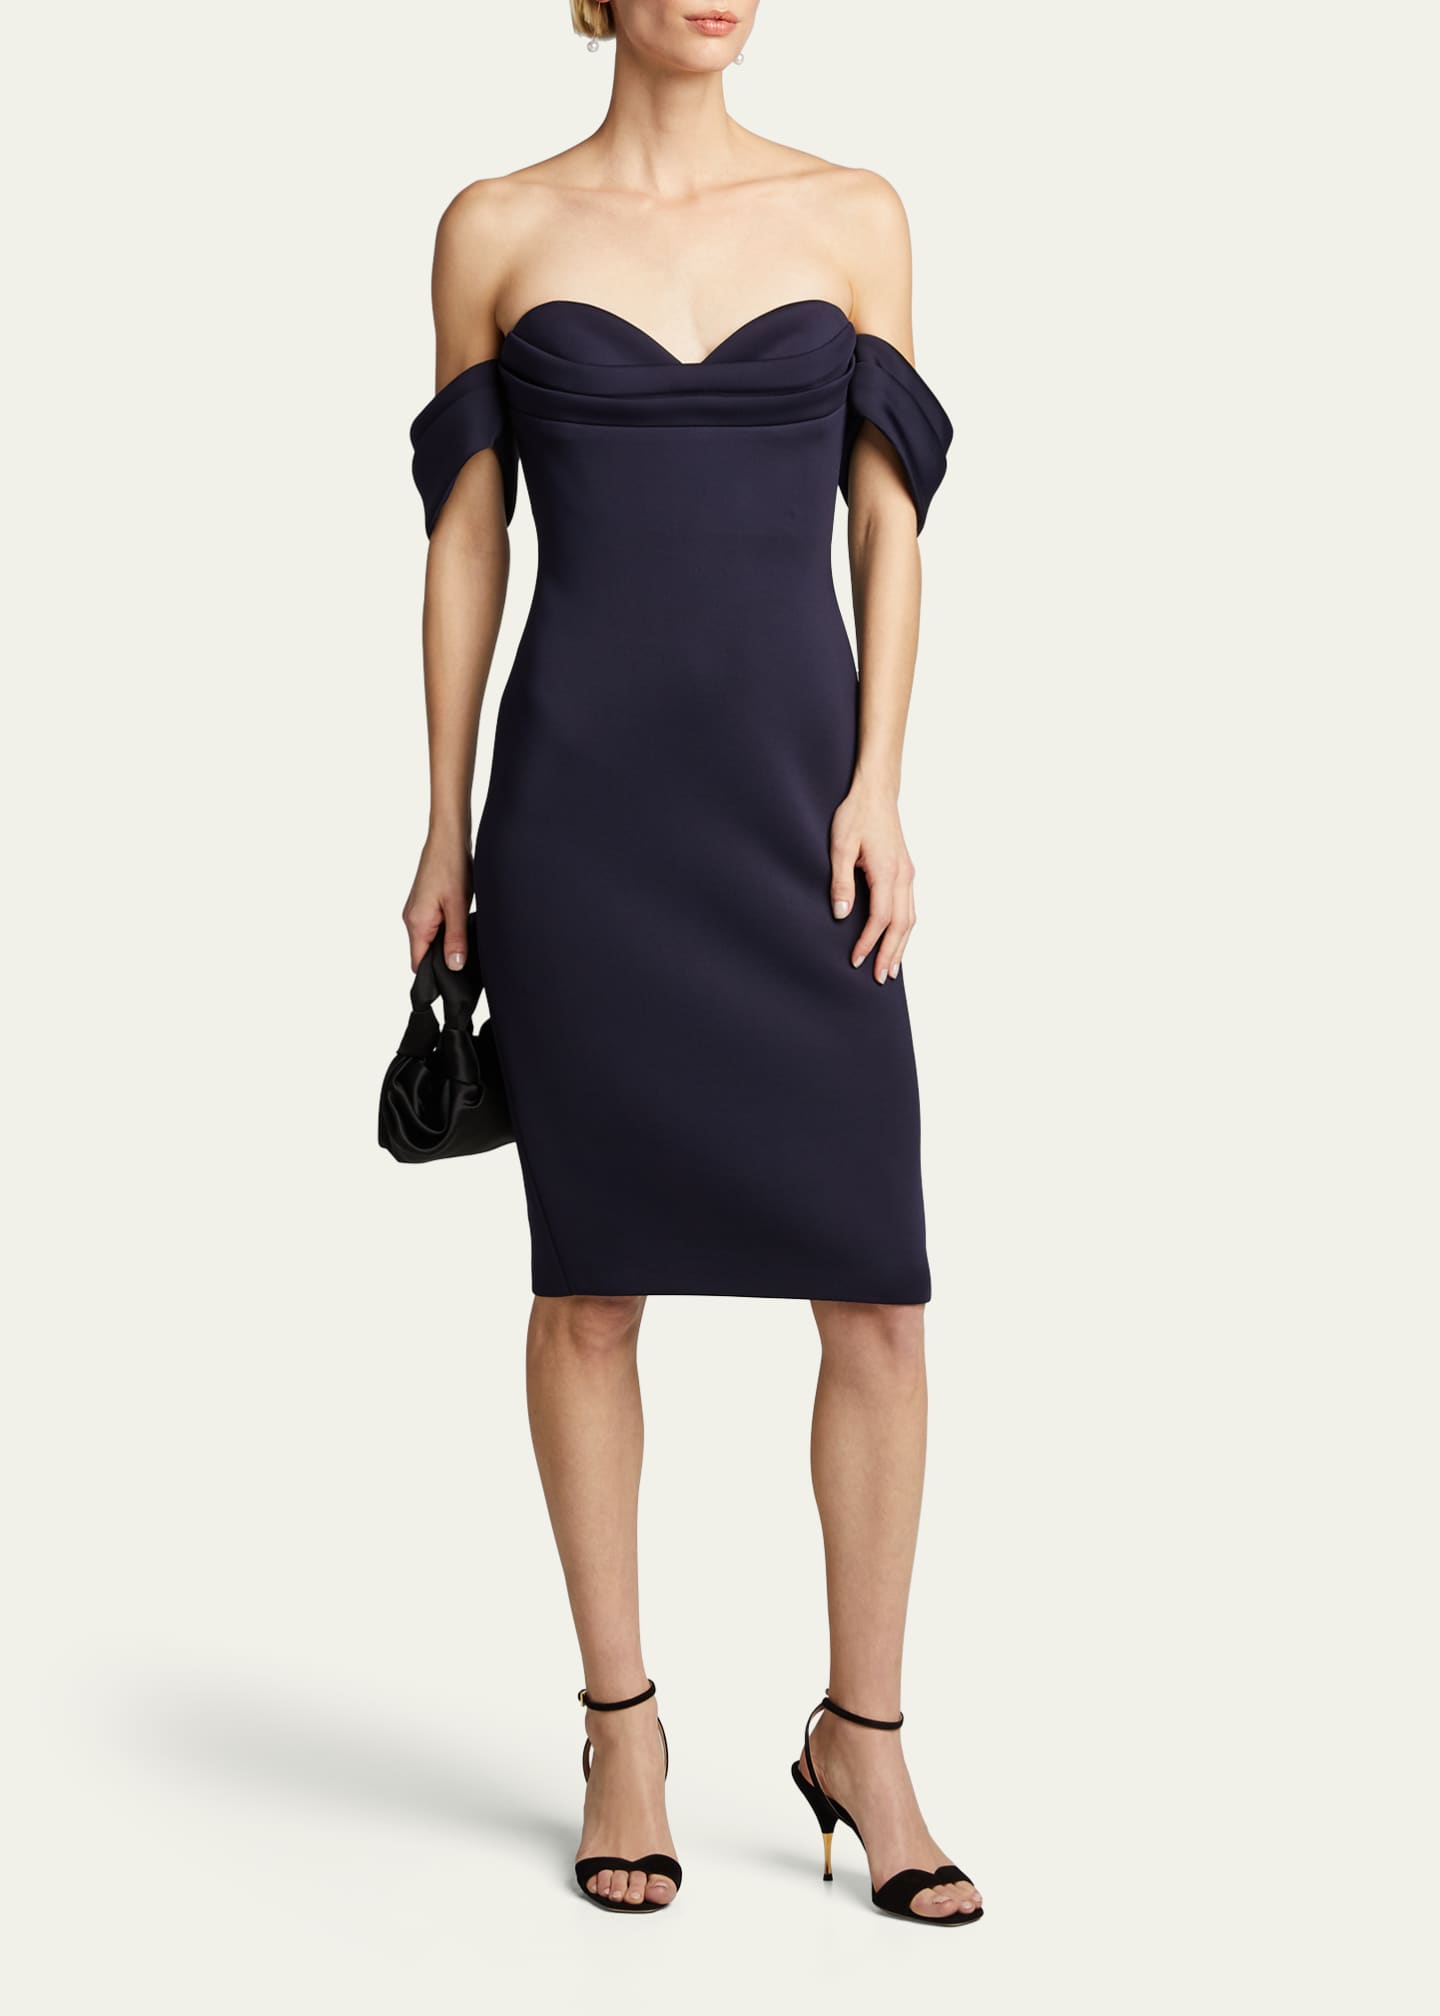 Alexis Rylan Pleated Off-the-Shoulder Dress, Navy Blue